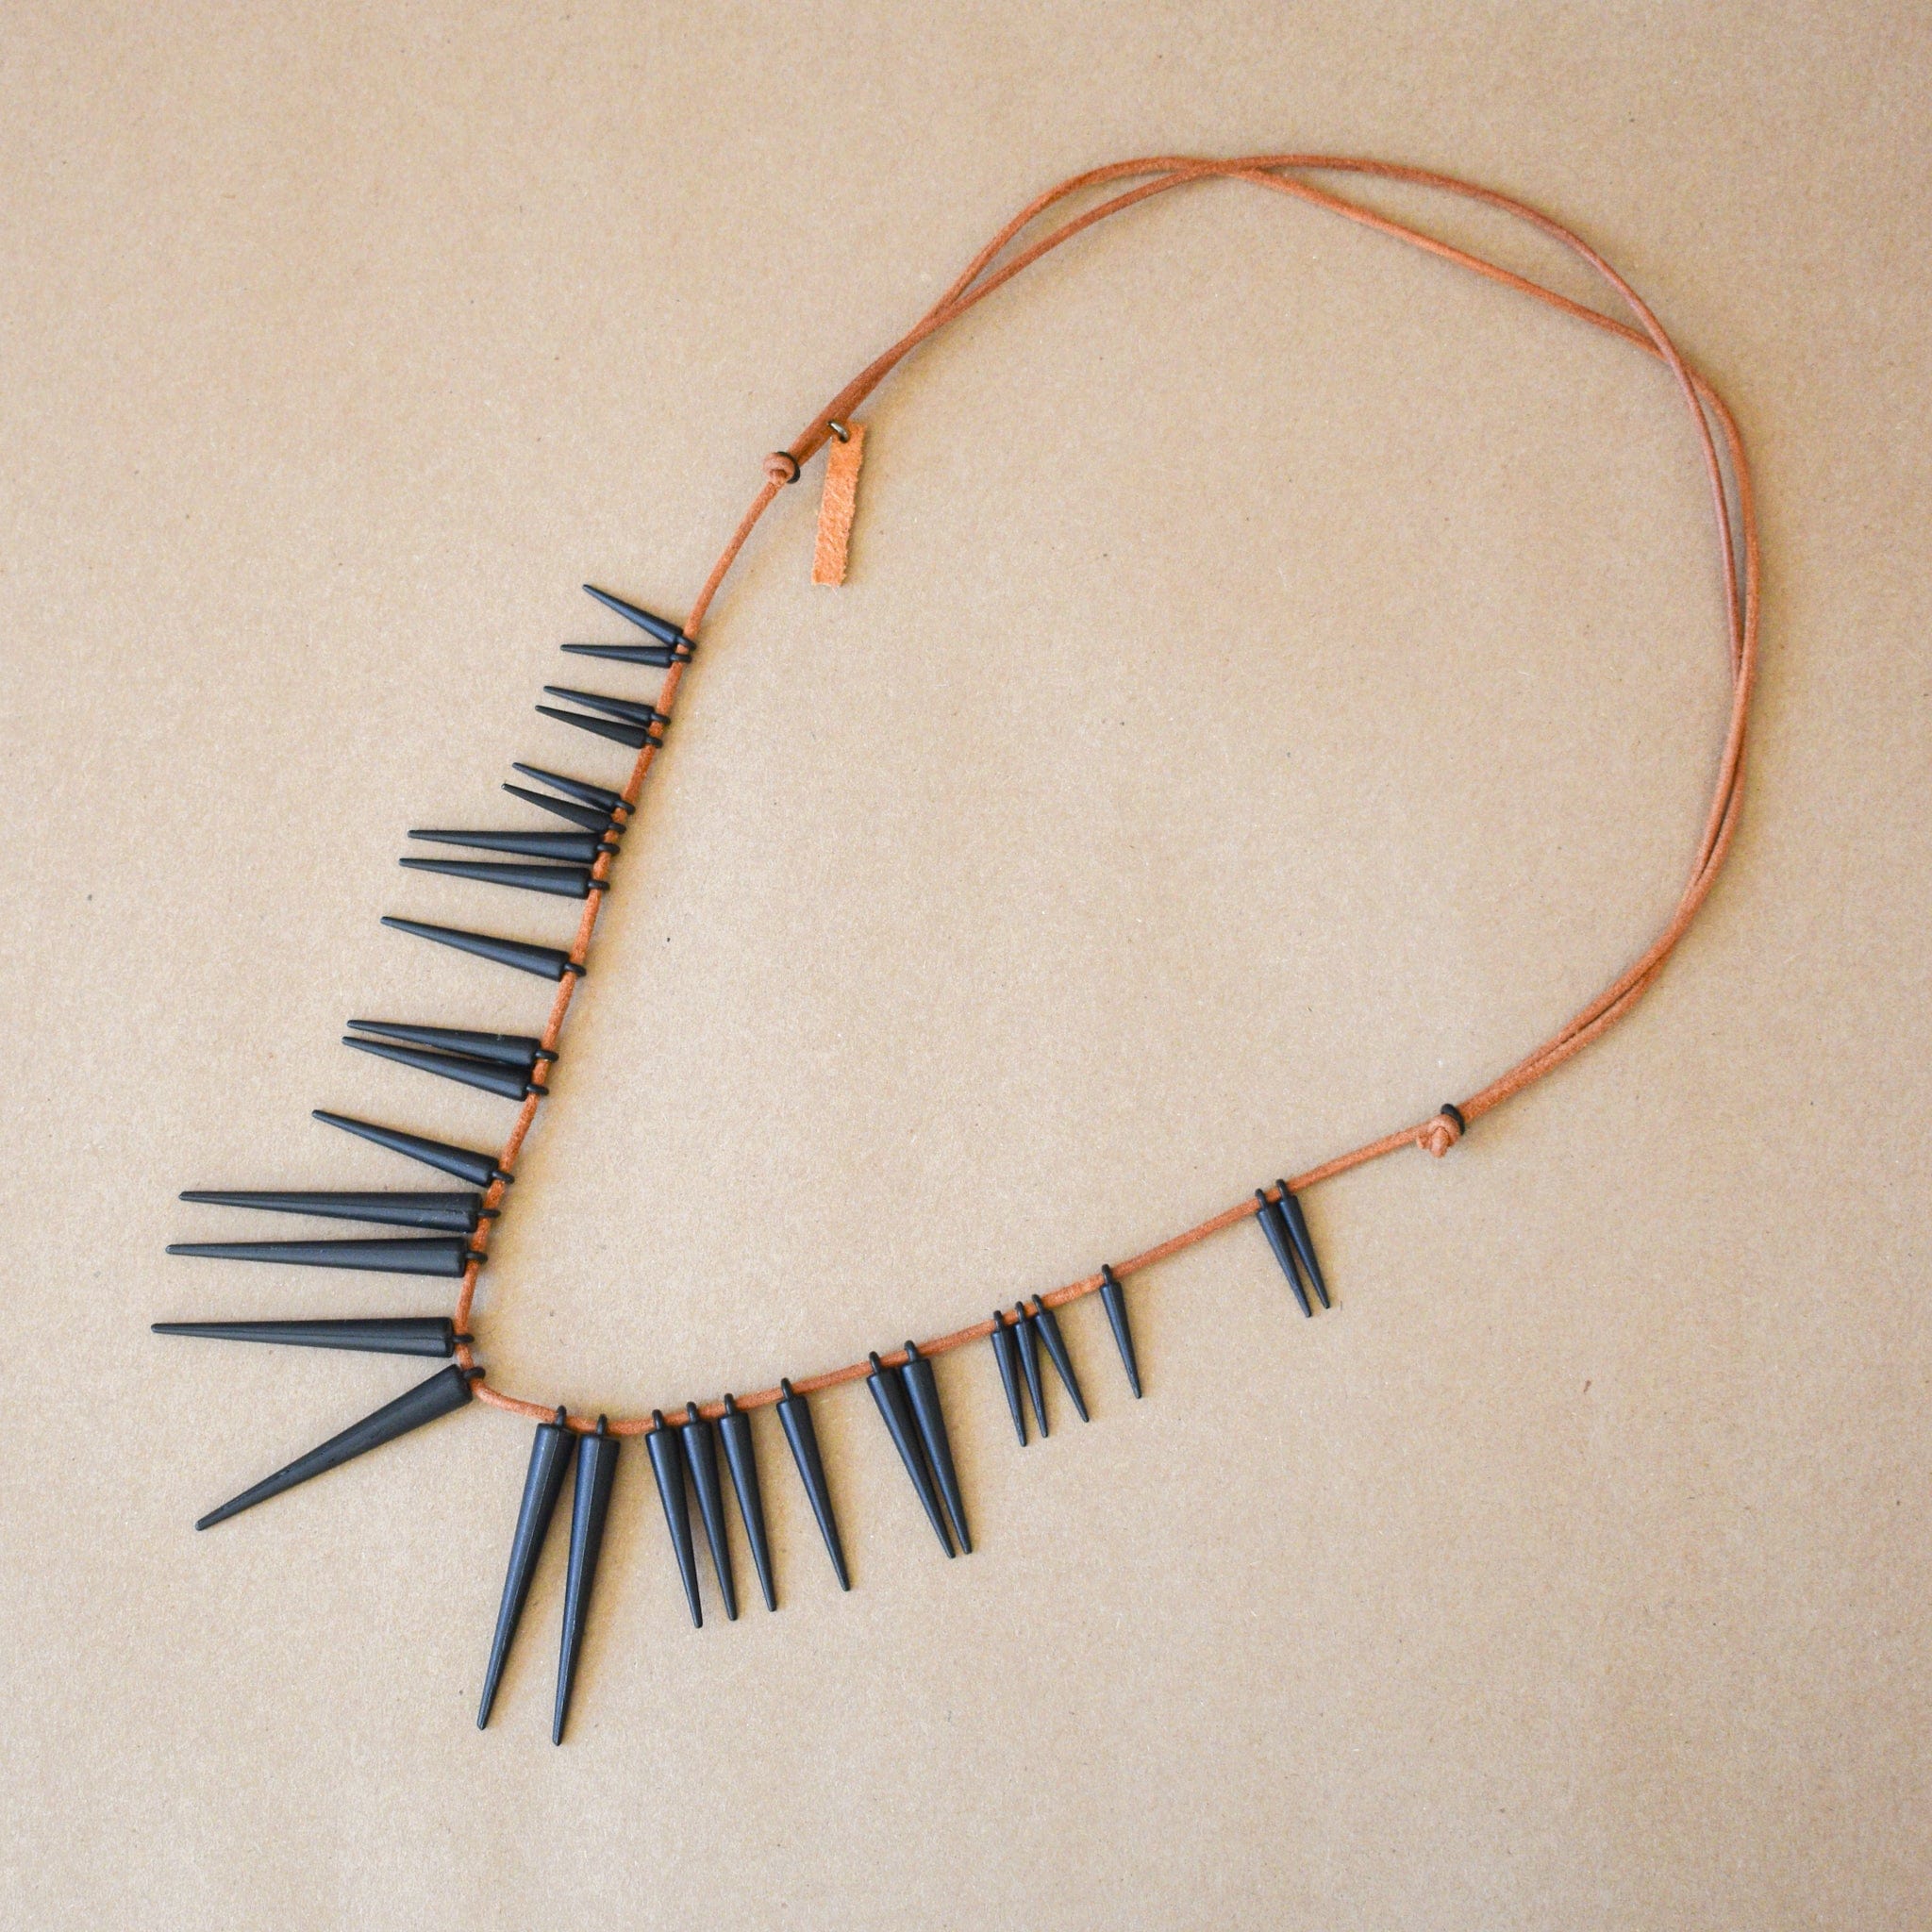 +COOP Jewlery Black Spikes on Tan Leather Necklace